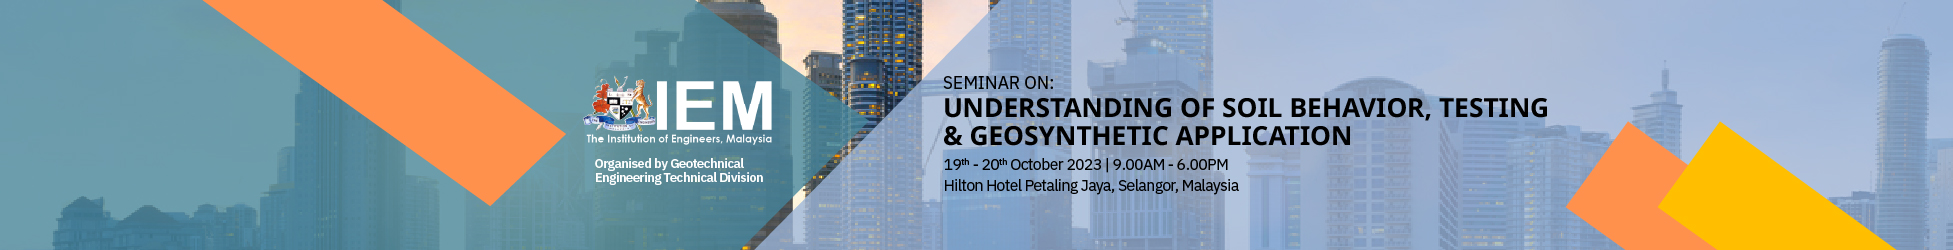 Image of Seminar on Understanding of Soil Behavior, Testing, & Geosynthetic Application in Malaysia